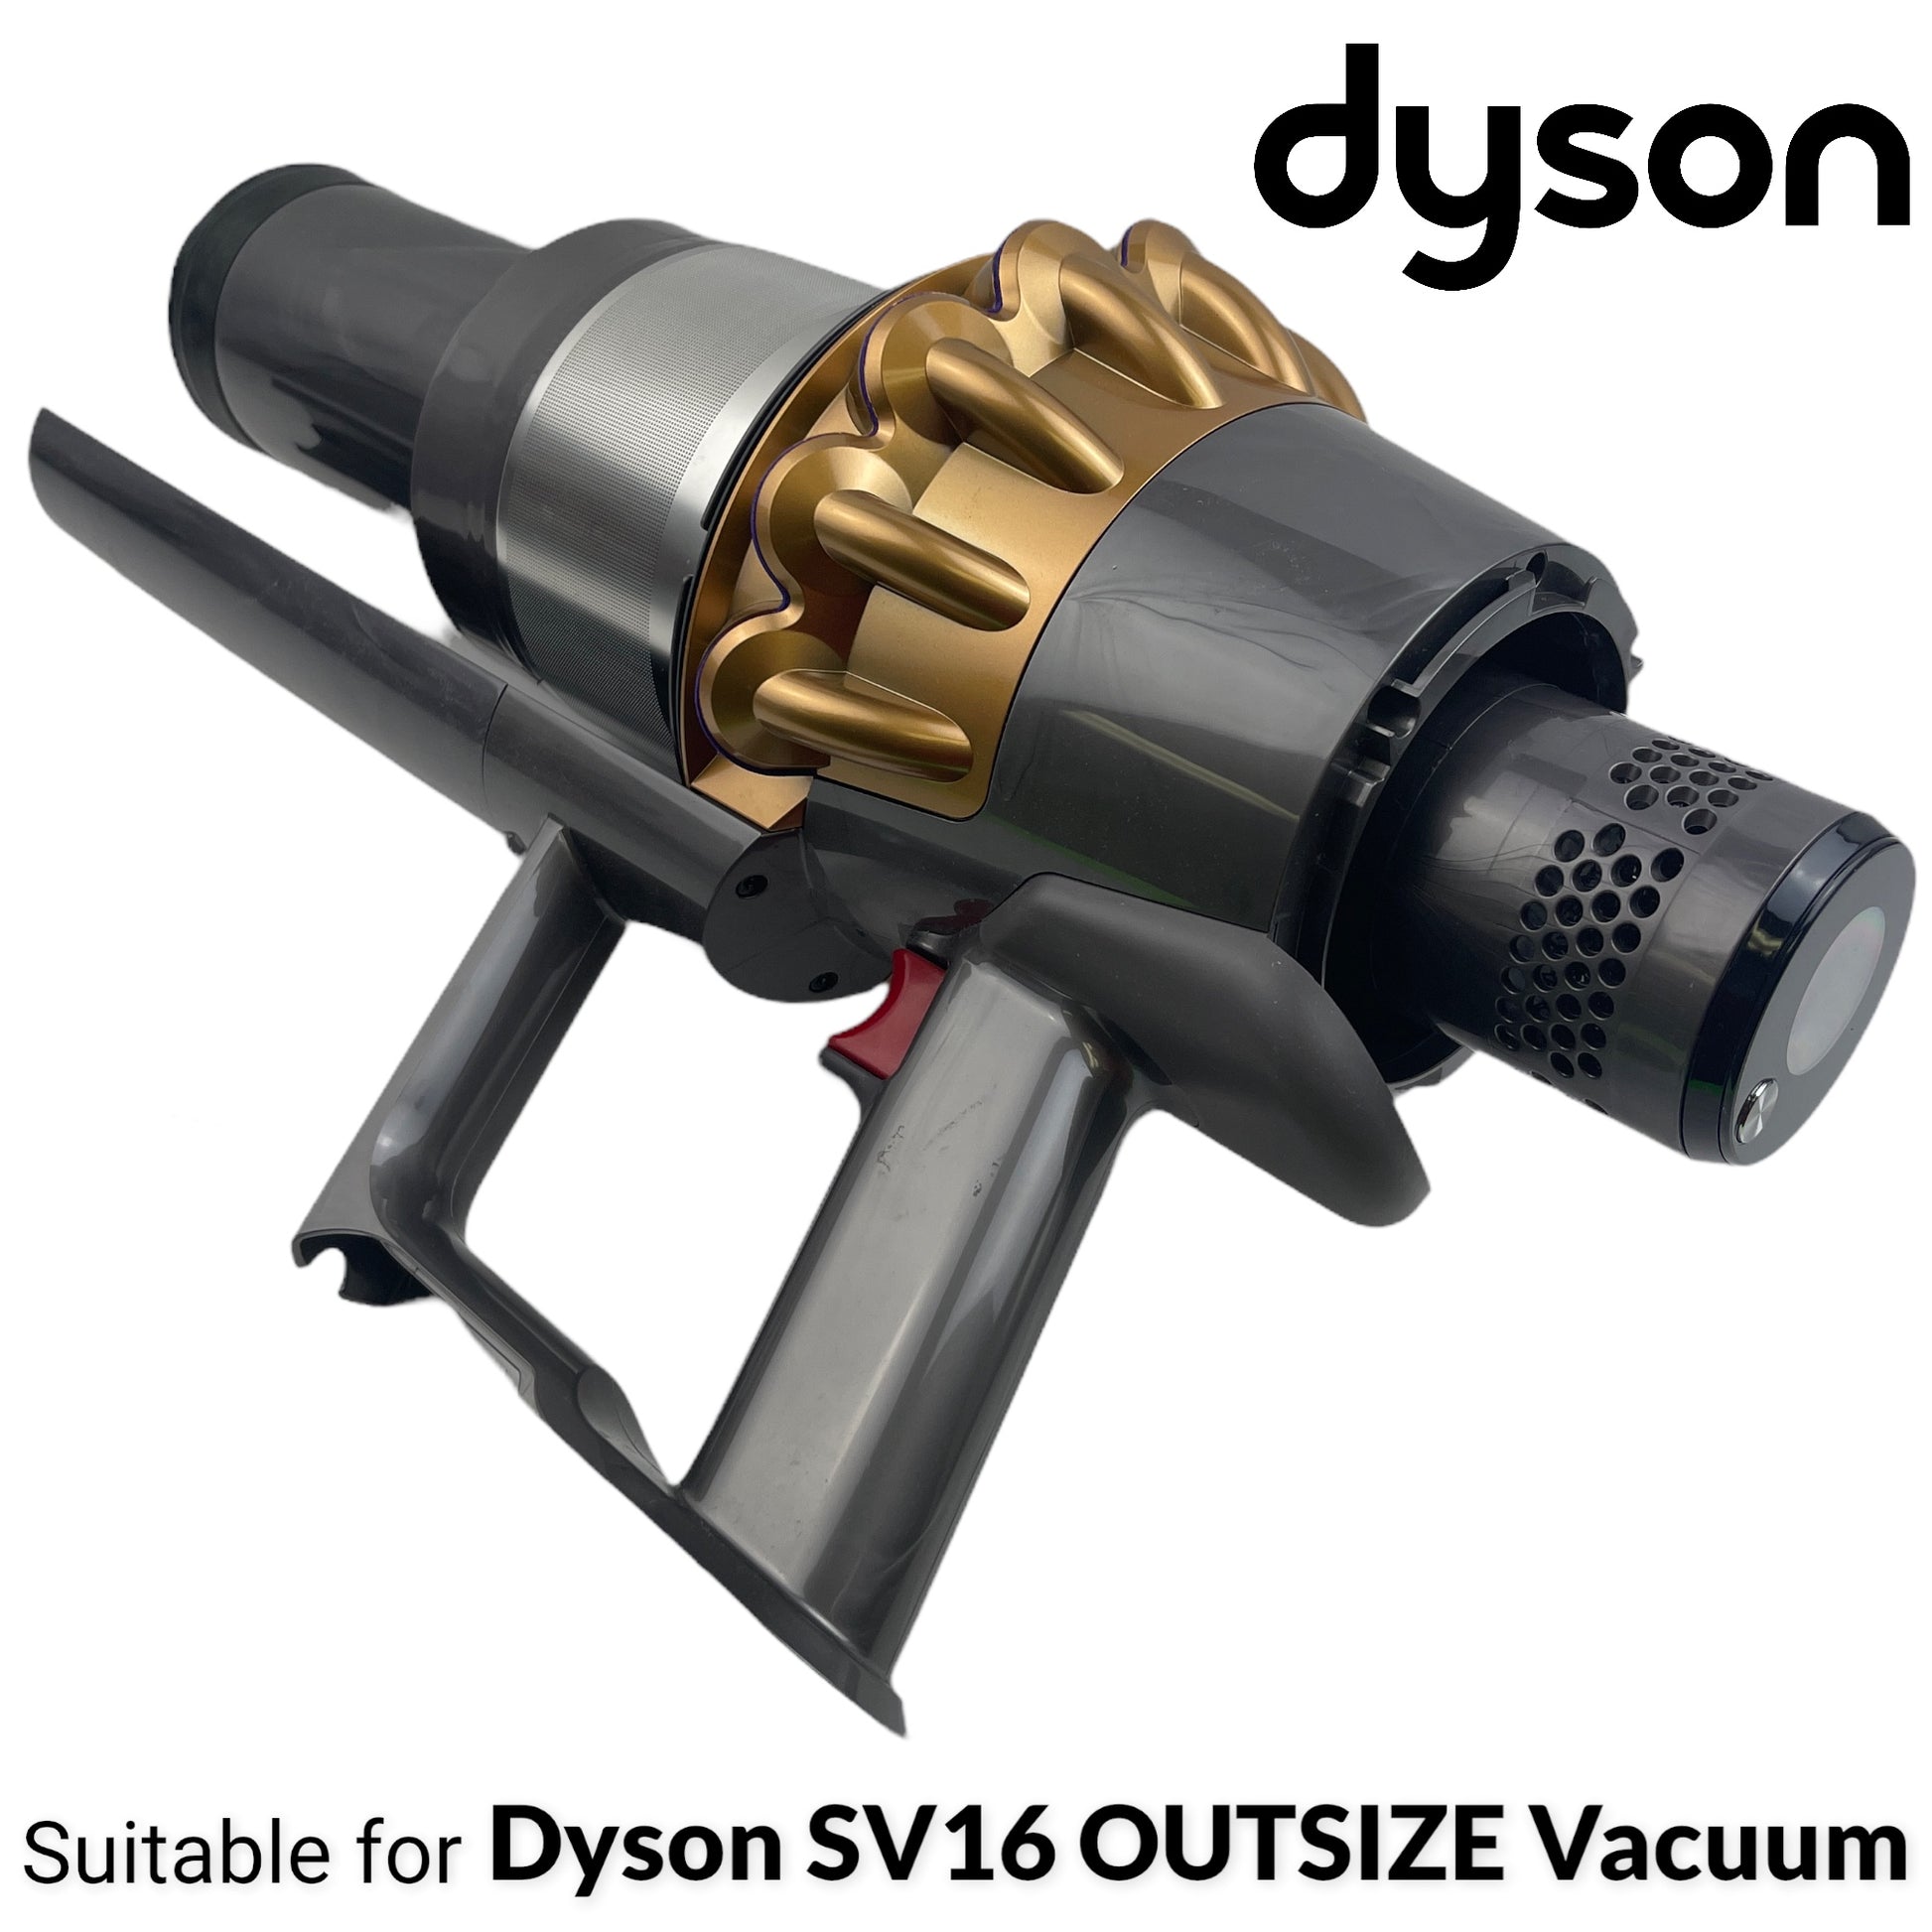 Dyson V10 cyclone and Body/Motor